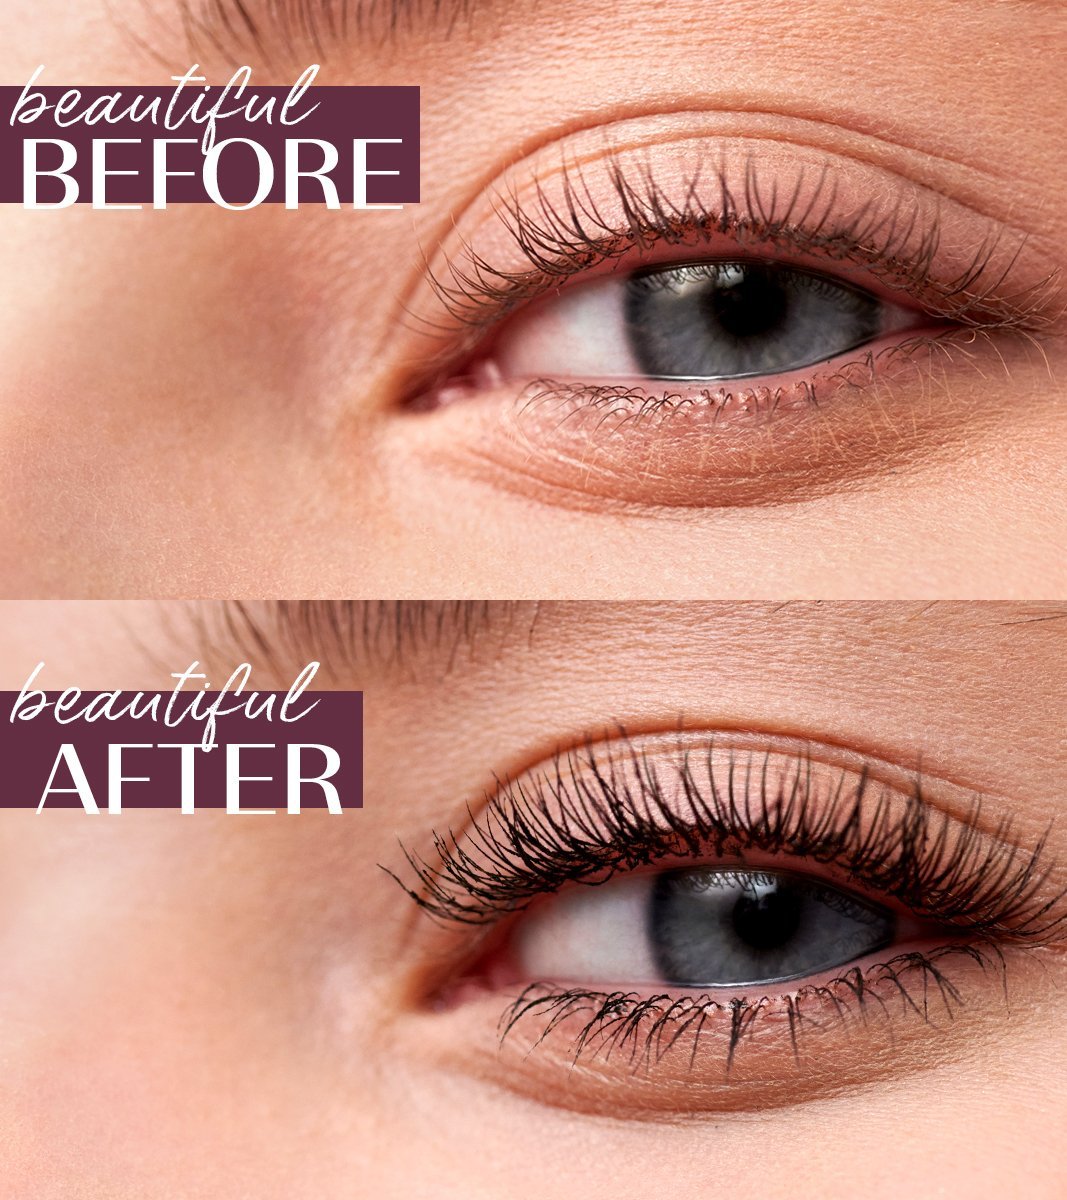 INFINITE POTENTIAL MASCARA TRAVEL SIZE (FULL VOLUME) Main Image featured